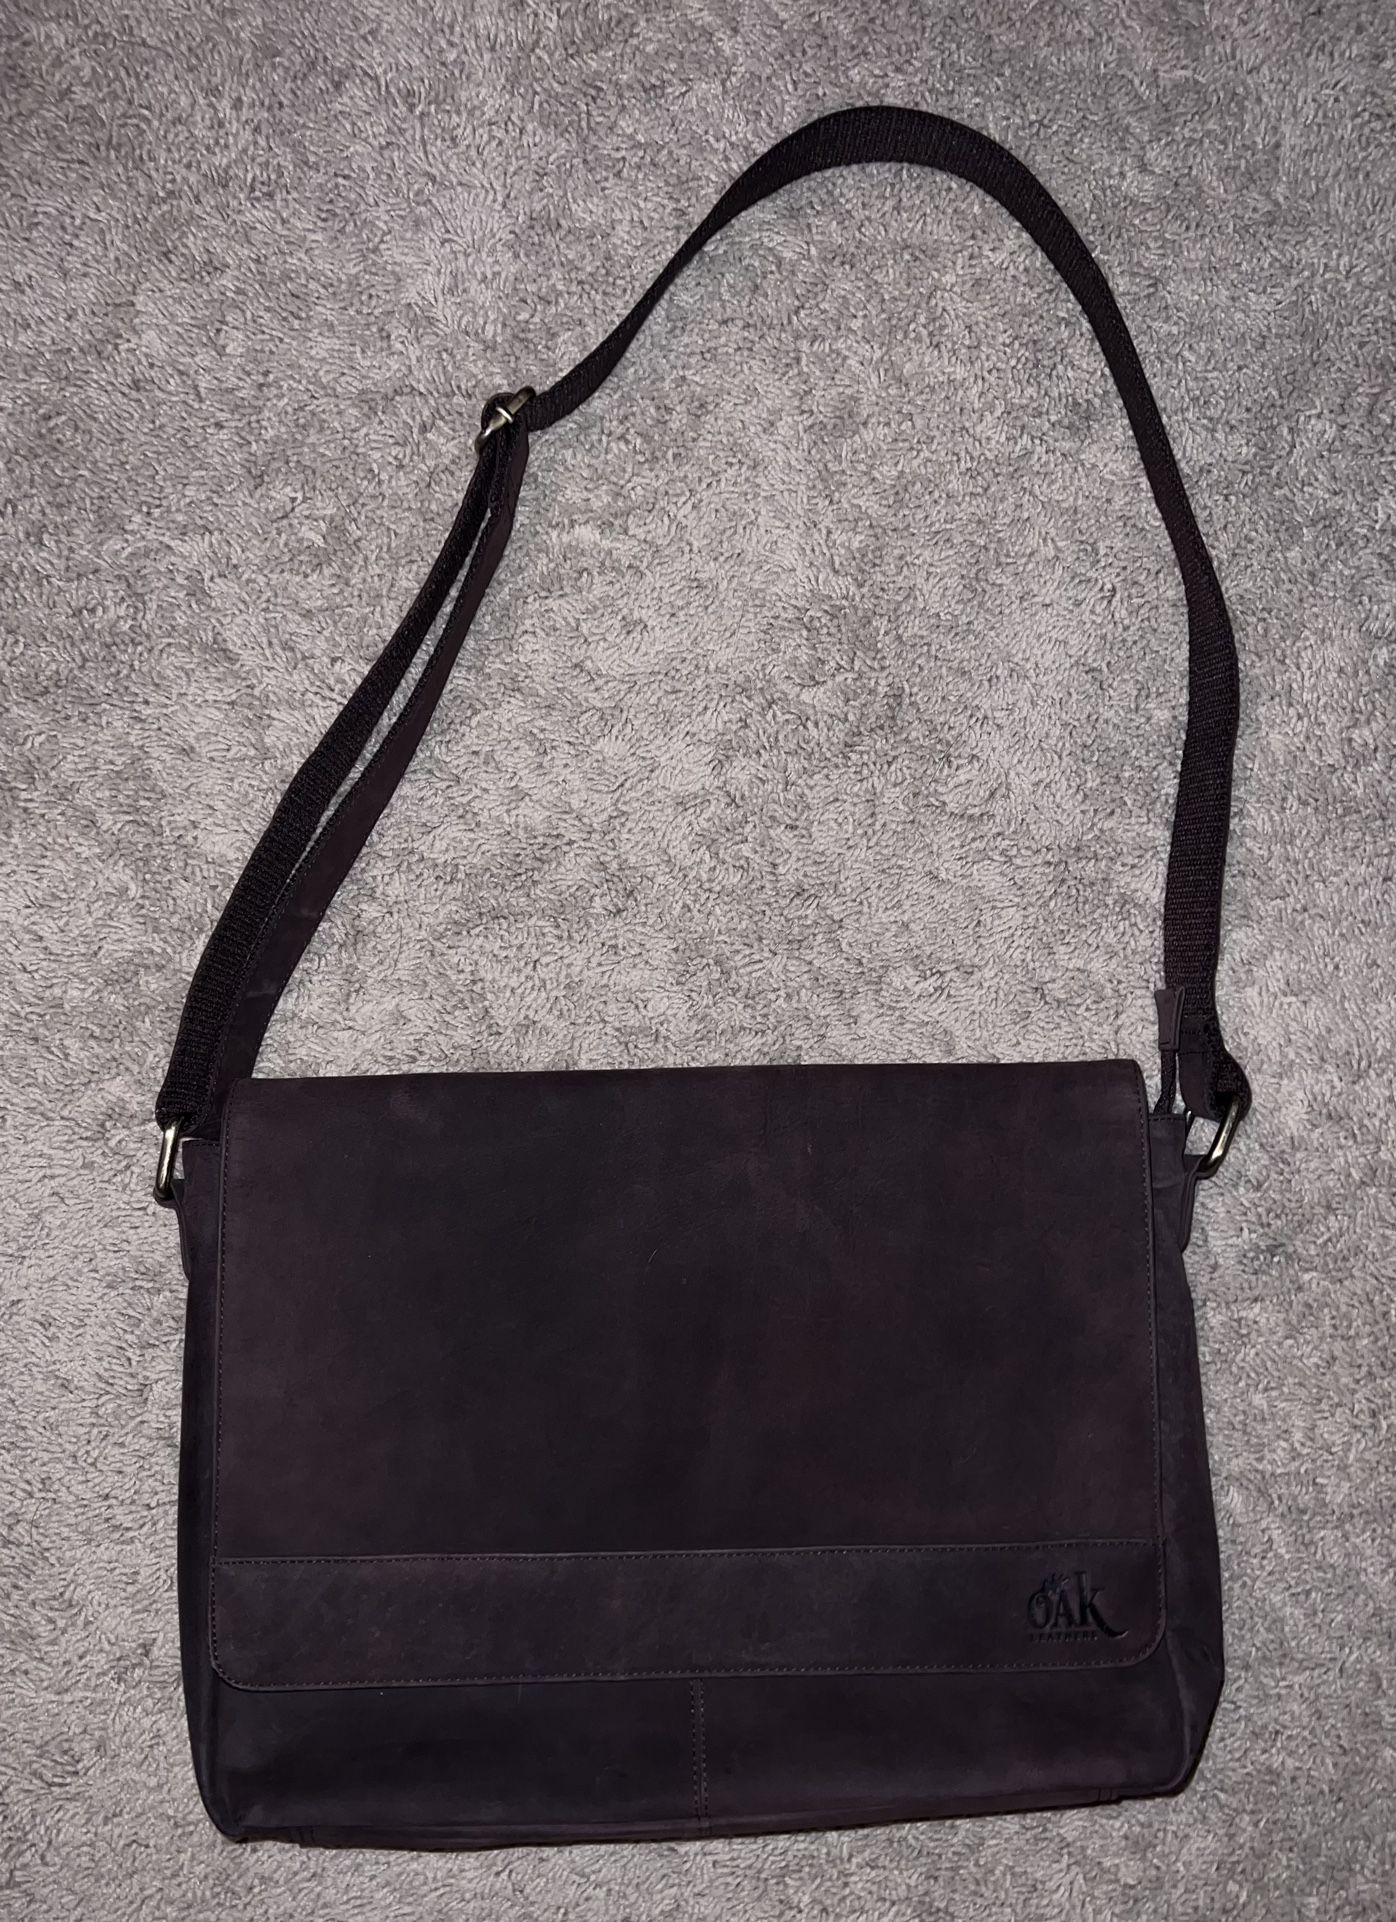 Never Used Leather/Suede Computer Messenger Bag